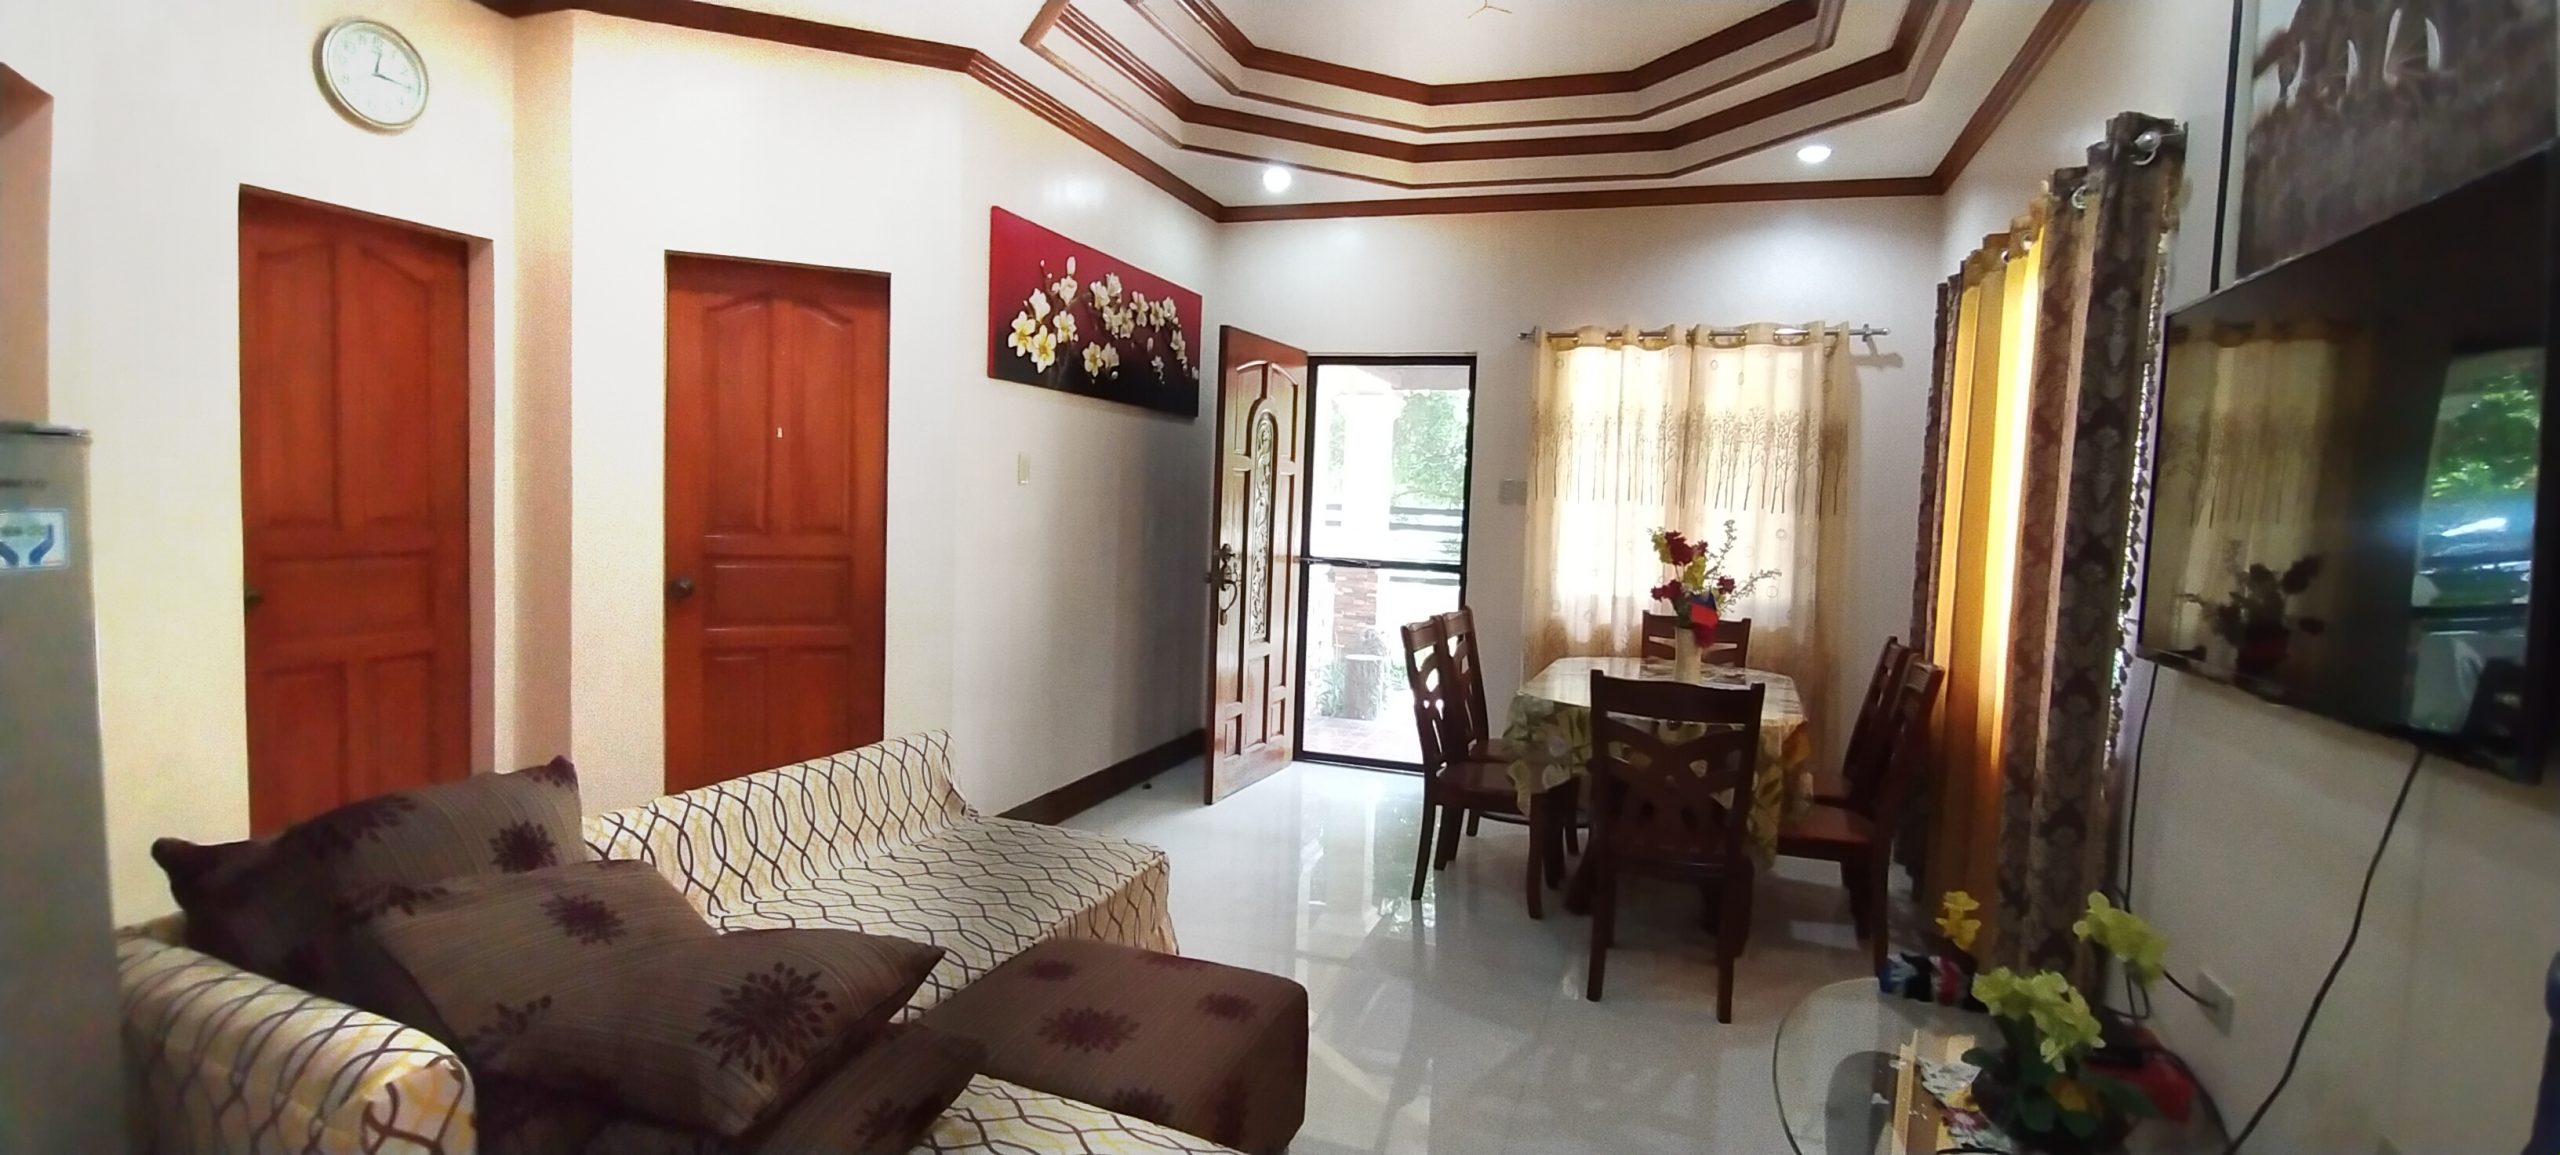 80sqm House and Lot for Sale in Banilad, Dumaguete